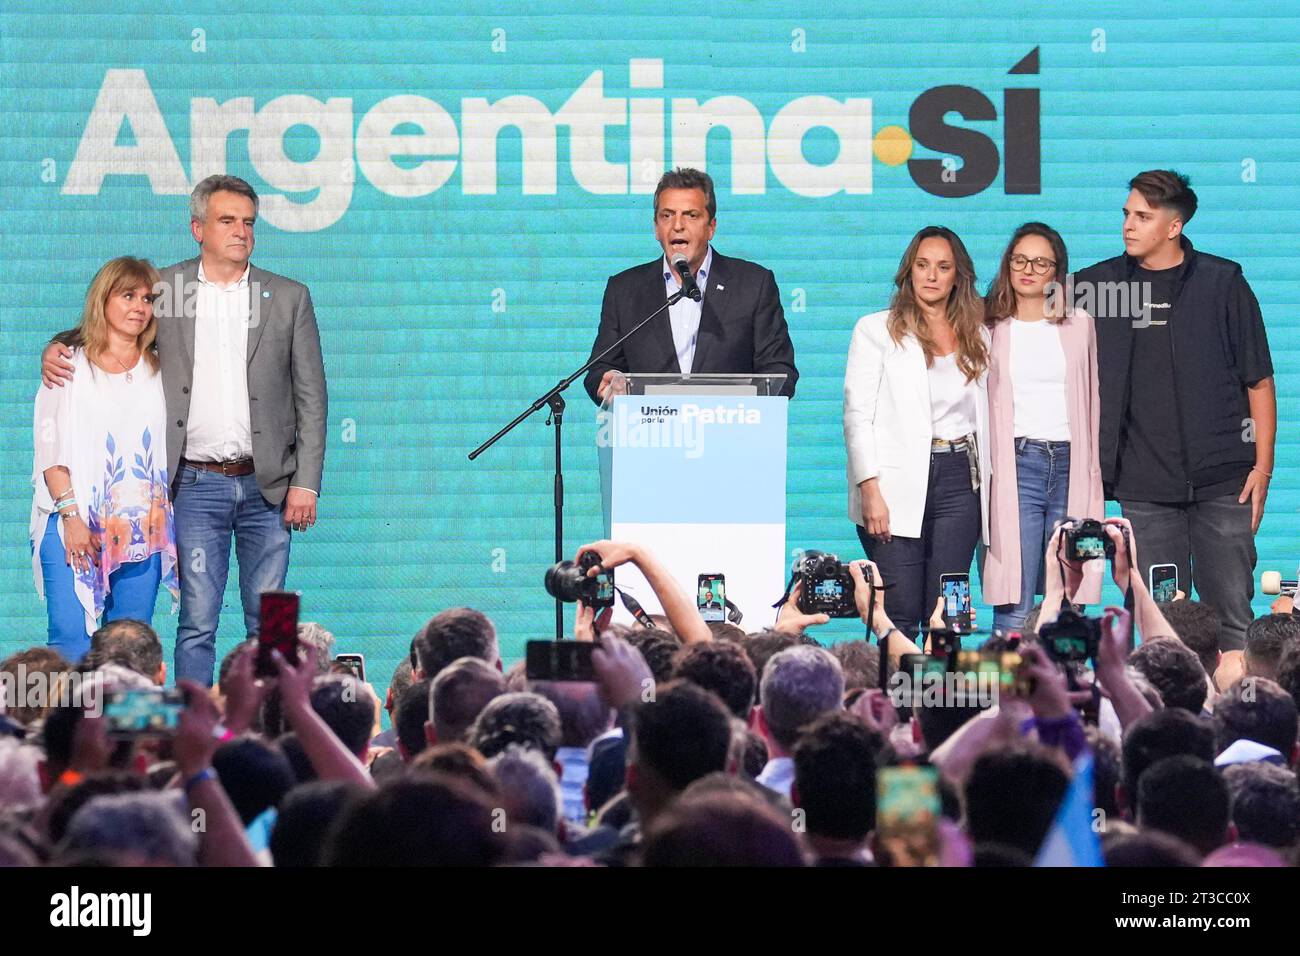 October 22, 2023, City of Buenos Aires, City of Buenos Aires, Argentina: INT. WorldNews. October 22, 2023. City of Buenos Aires, Argentina.- Presidential candidate of Union Por La Patria and current Minister of Economy Sergio Massa and his vice-president candidate, Agustin Rossi, with their family give thanks and talk to coalition demonstrators on October 22, 2023, at their bunker in the City of Buenos Aires, Argentina, after the presidential Elections. There will be ballotage of Presidential candidate on November 19, 2023 against Union Por La Patria coalition (Sergio Massa) and Liberty Advan Stock Photo